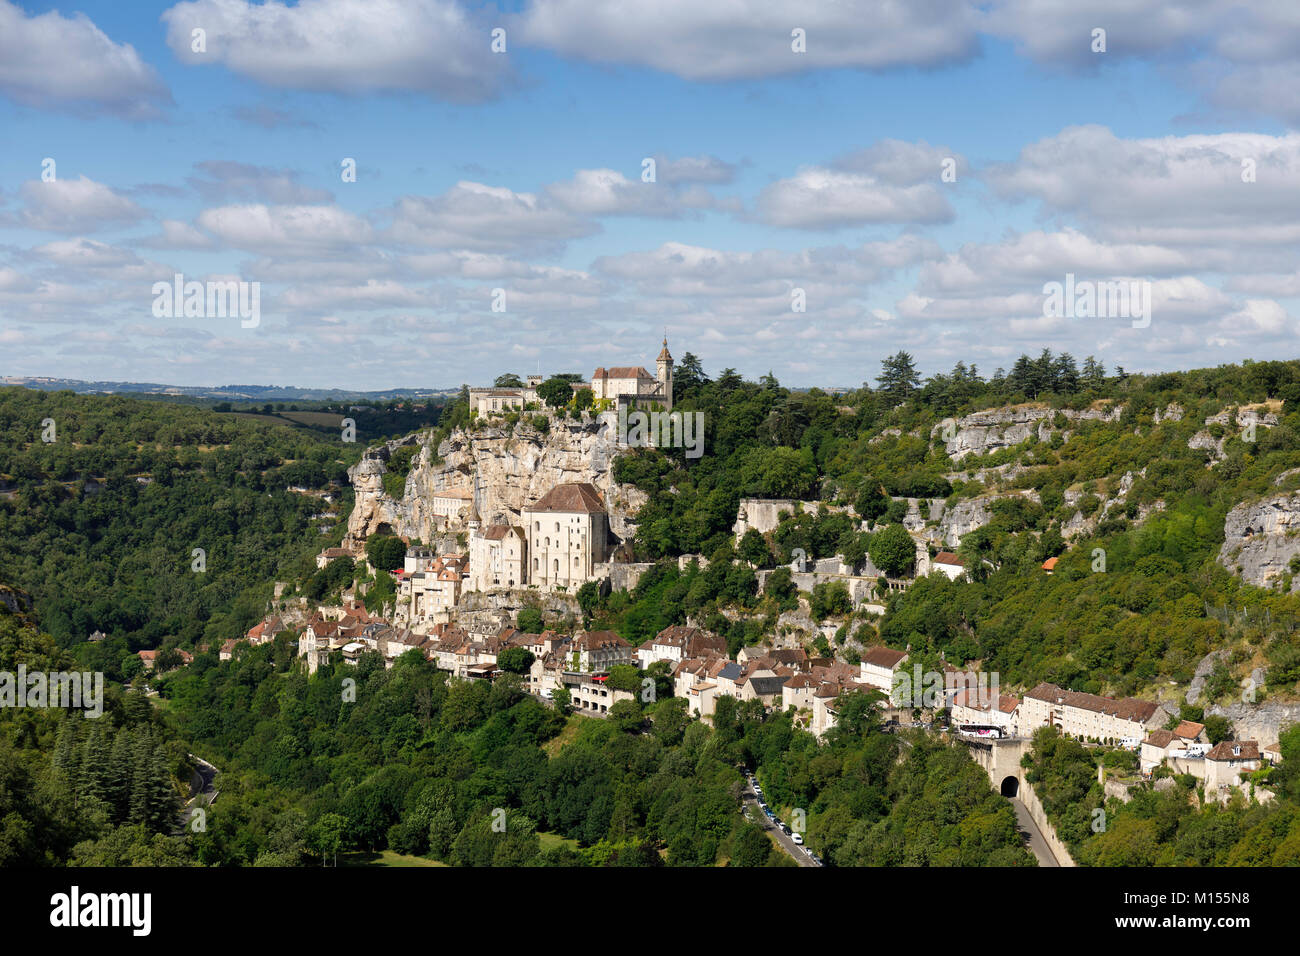 Rocamadour has attracted visitors for its setting in a gorge above a tributary of the River Dordogne, . Stock Photo